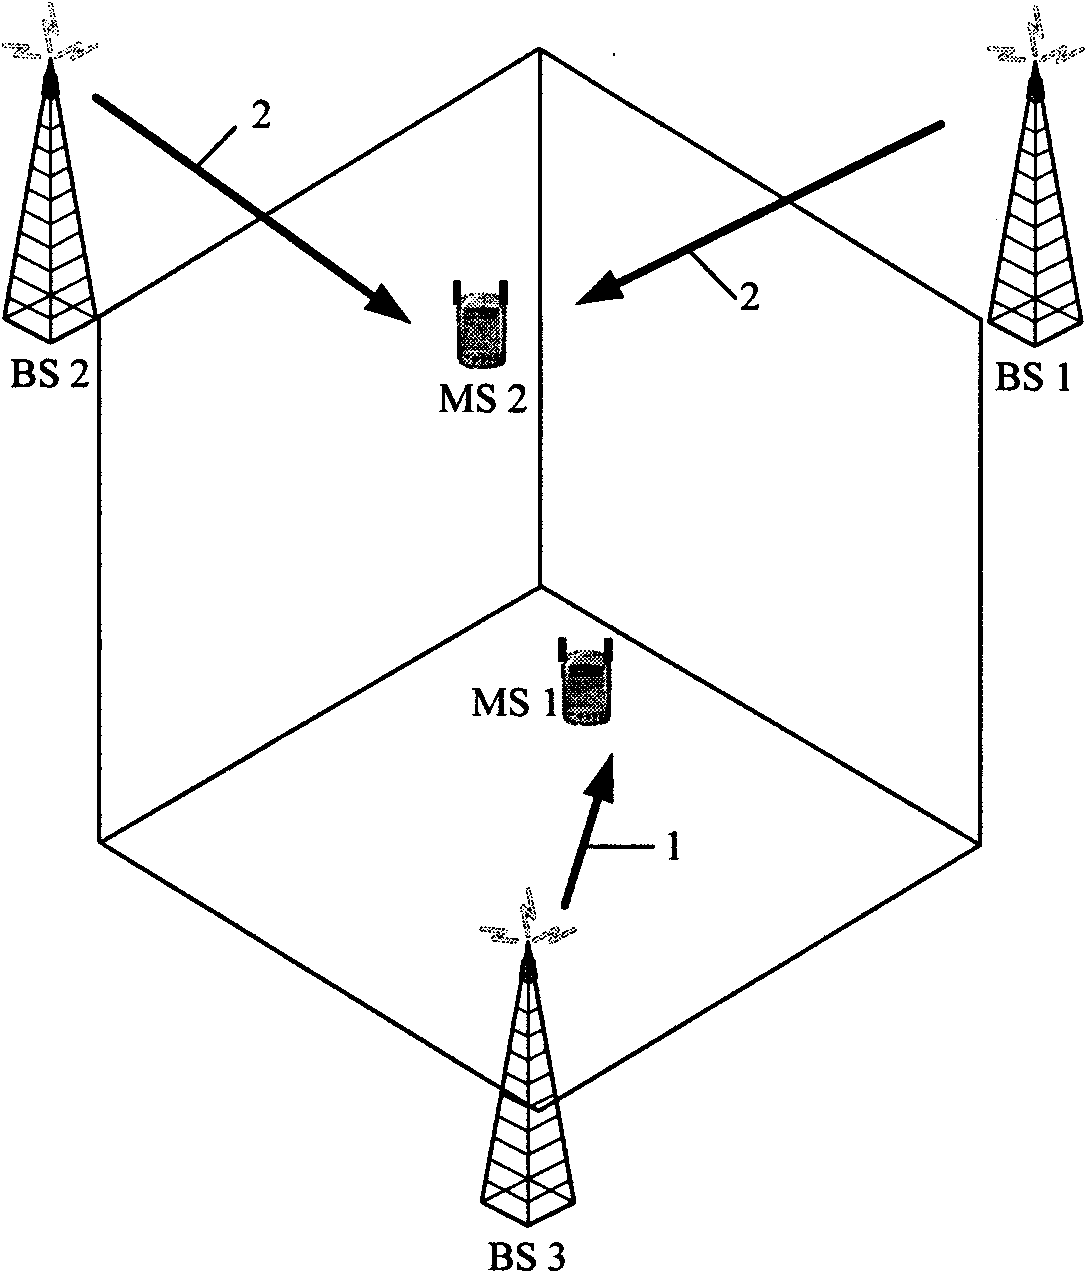 Local scheduler-based multi-point cooperative transmission method